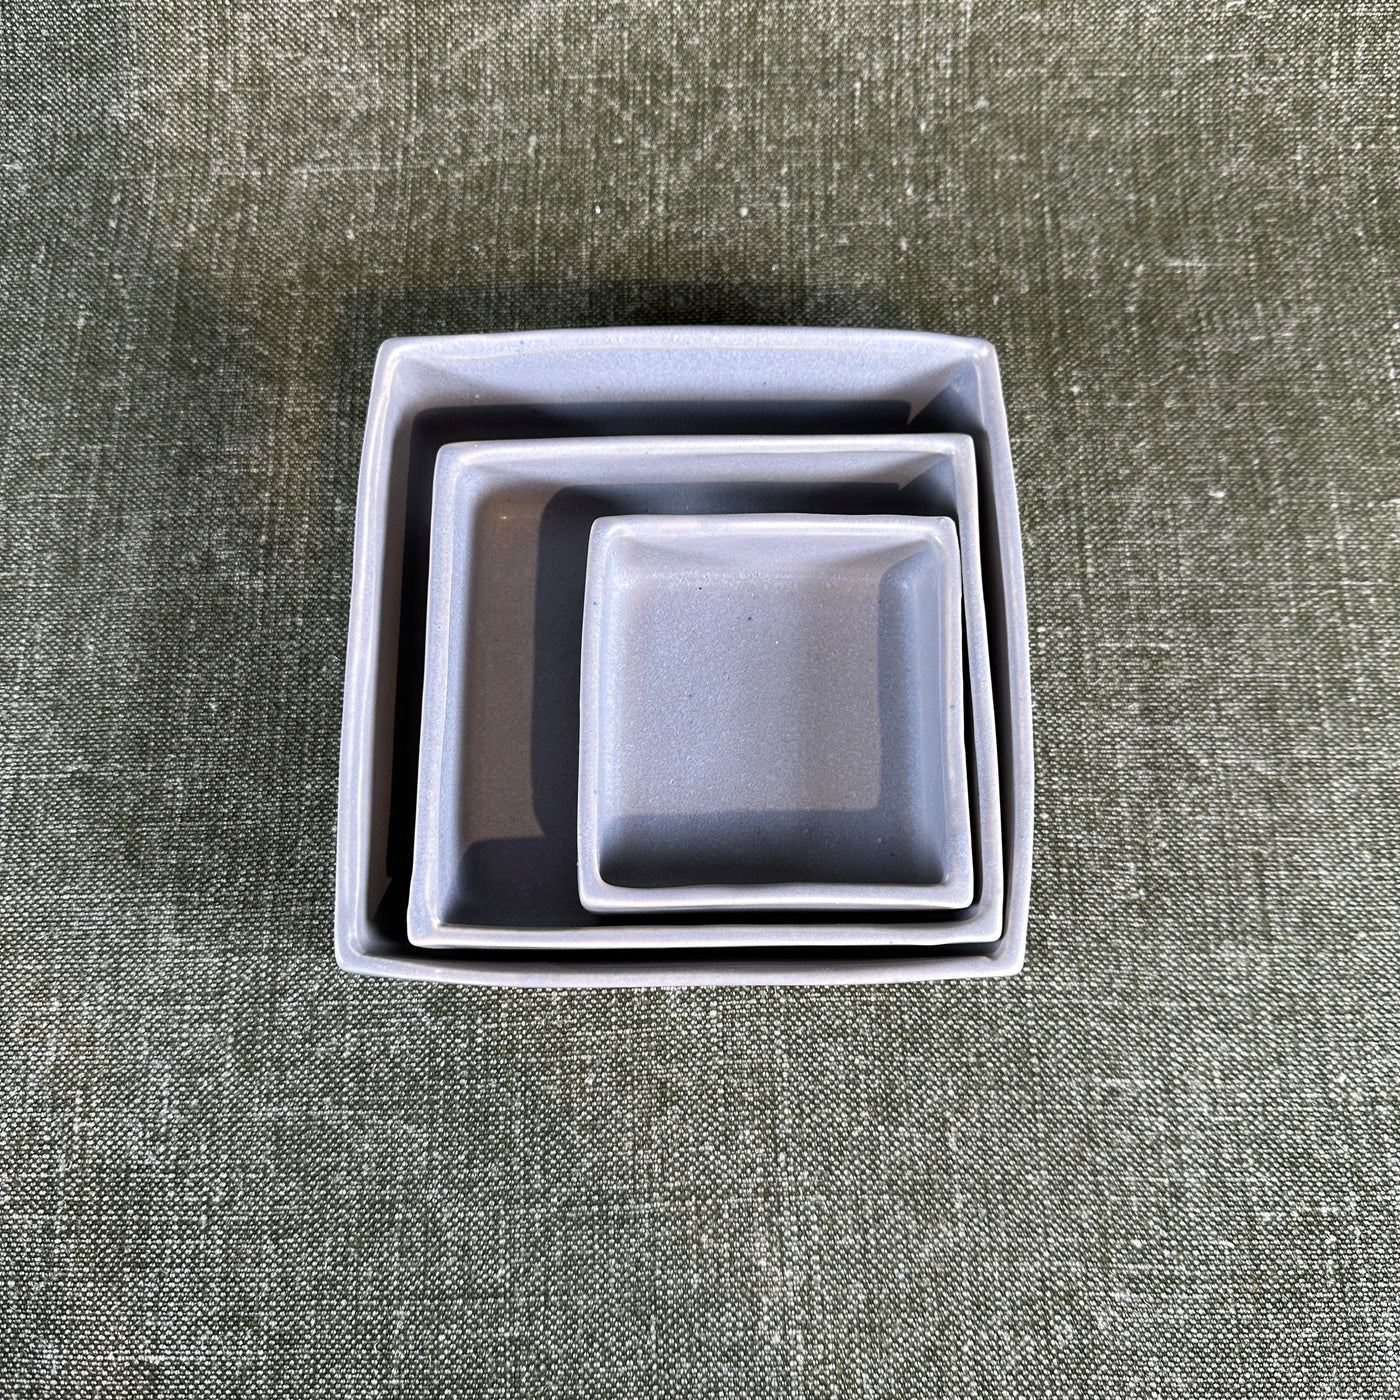 Square Tray by Lauren HB Studio - The Grey Pearl